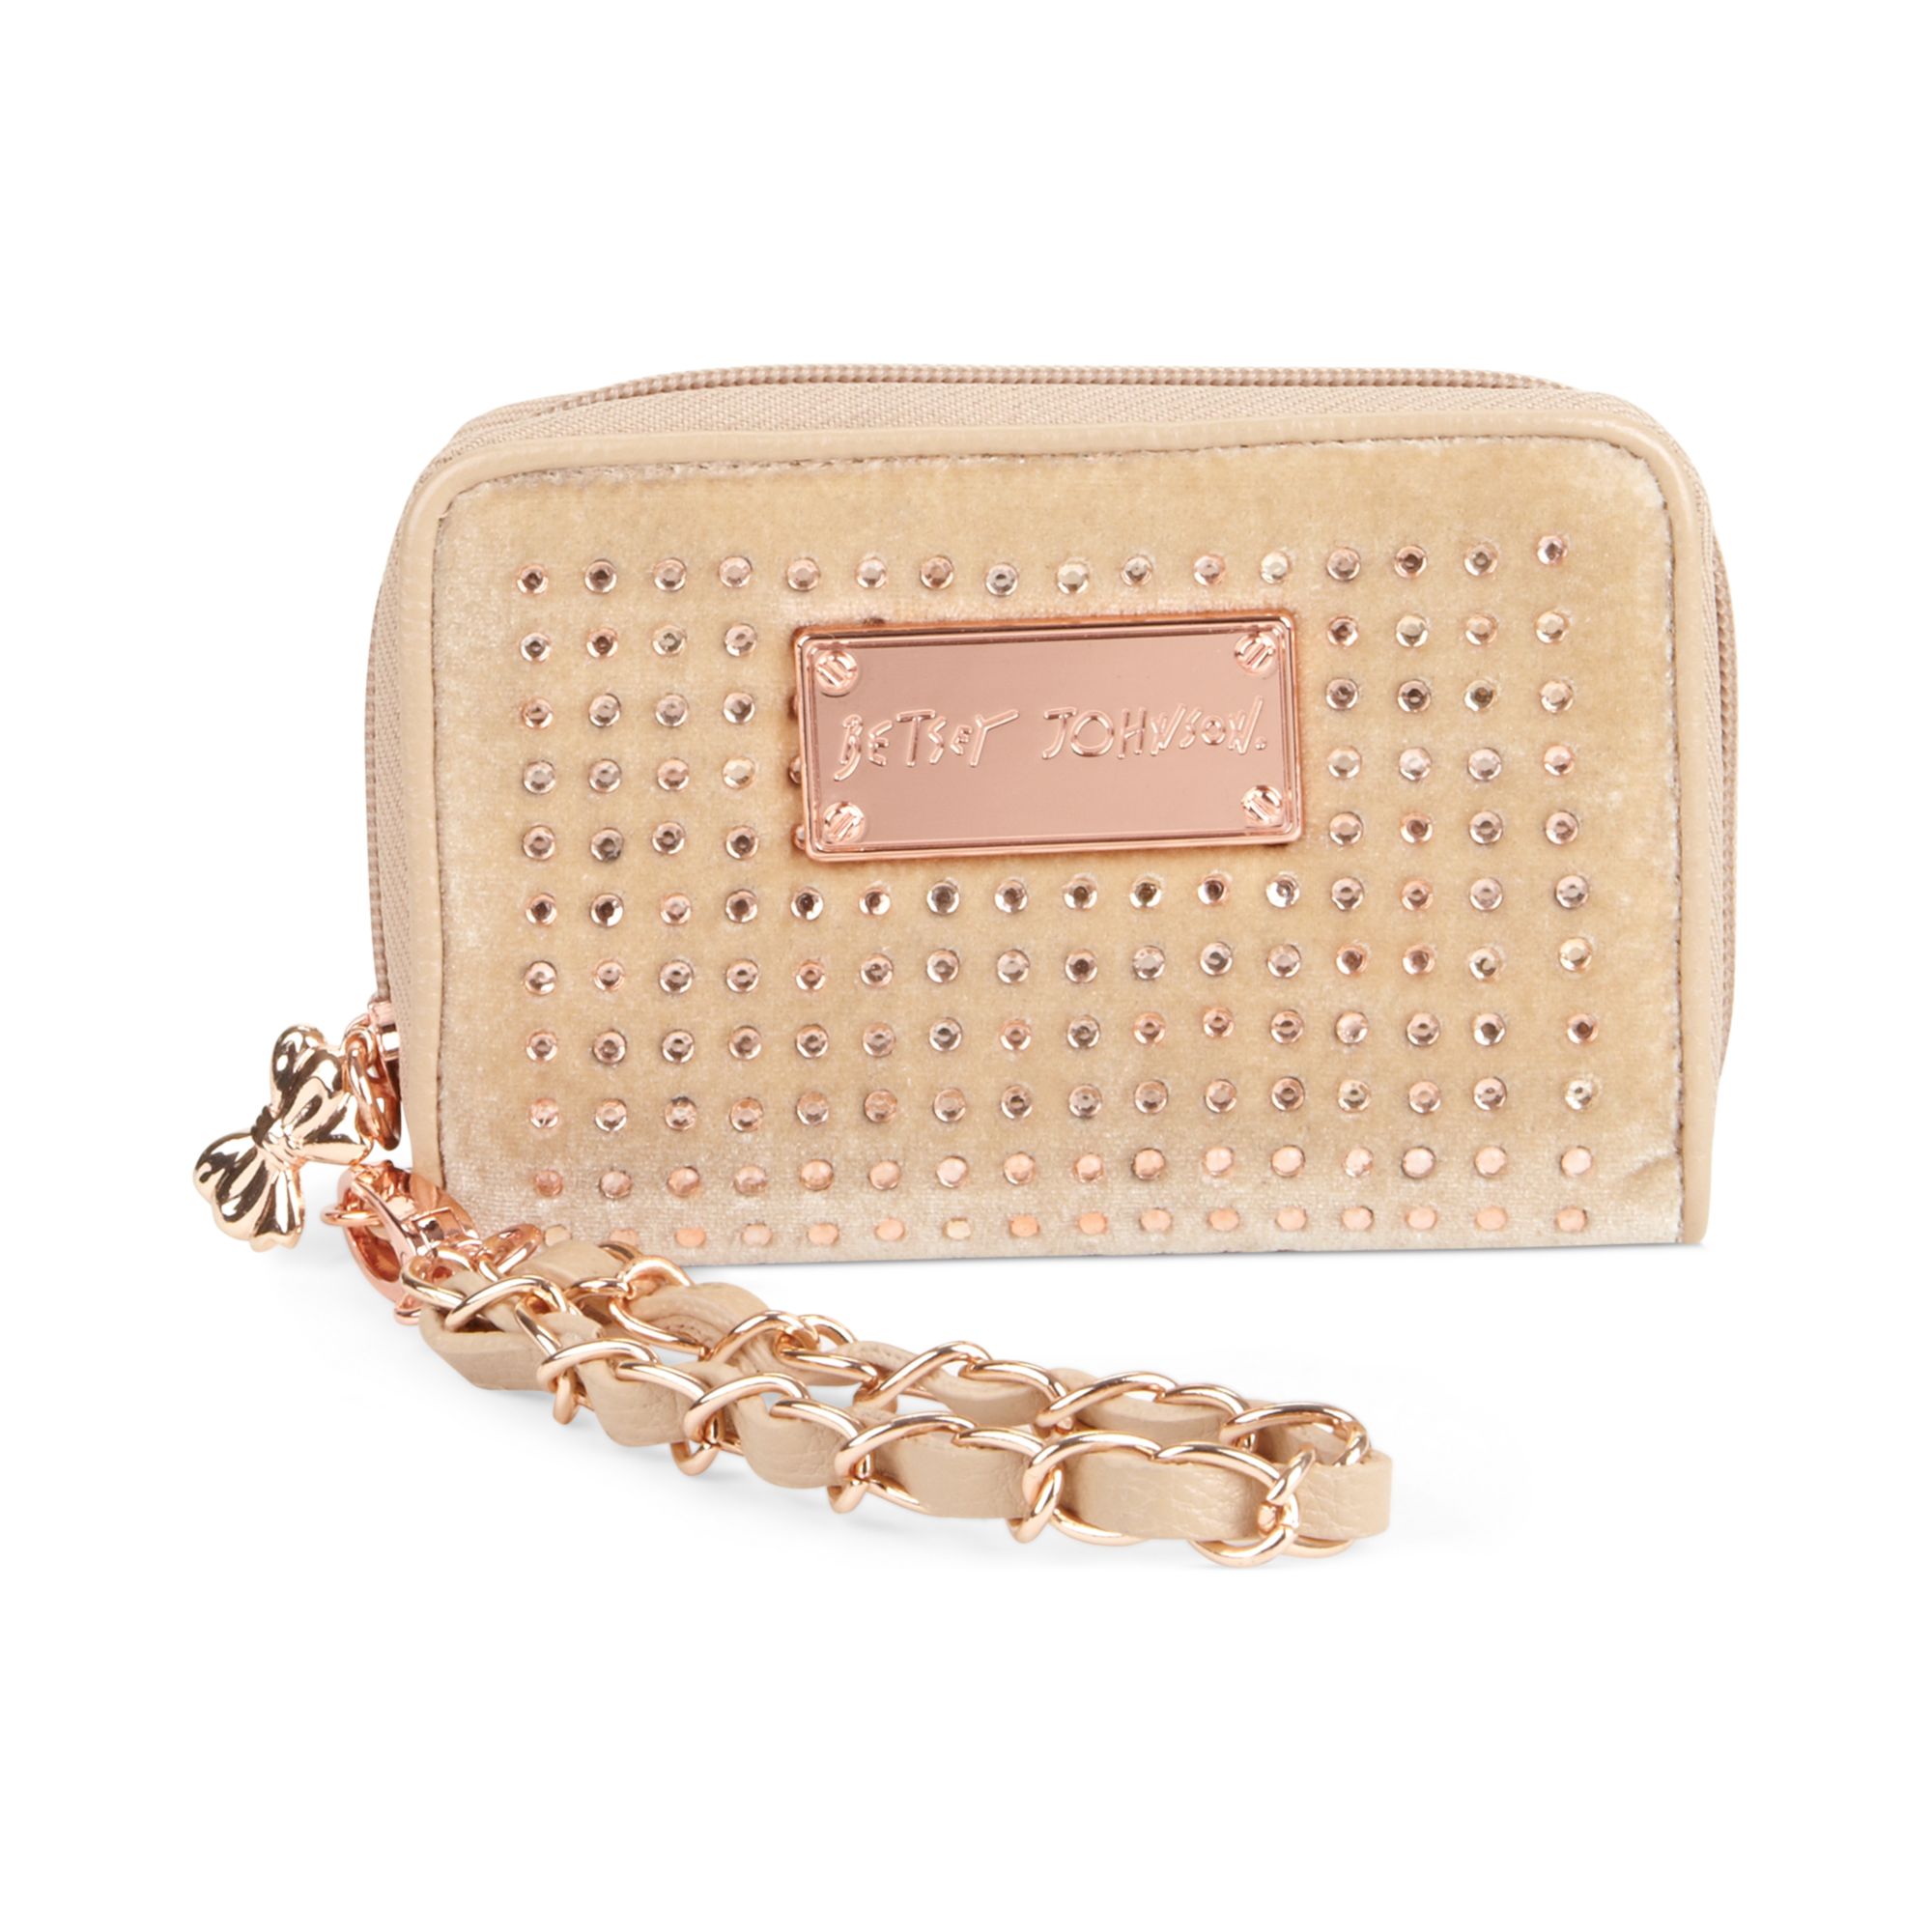 Lyst - Betsey Johnson Holiday Pda Case in Metallic